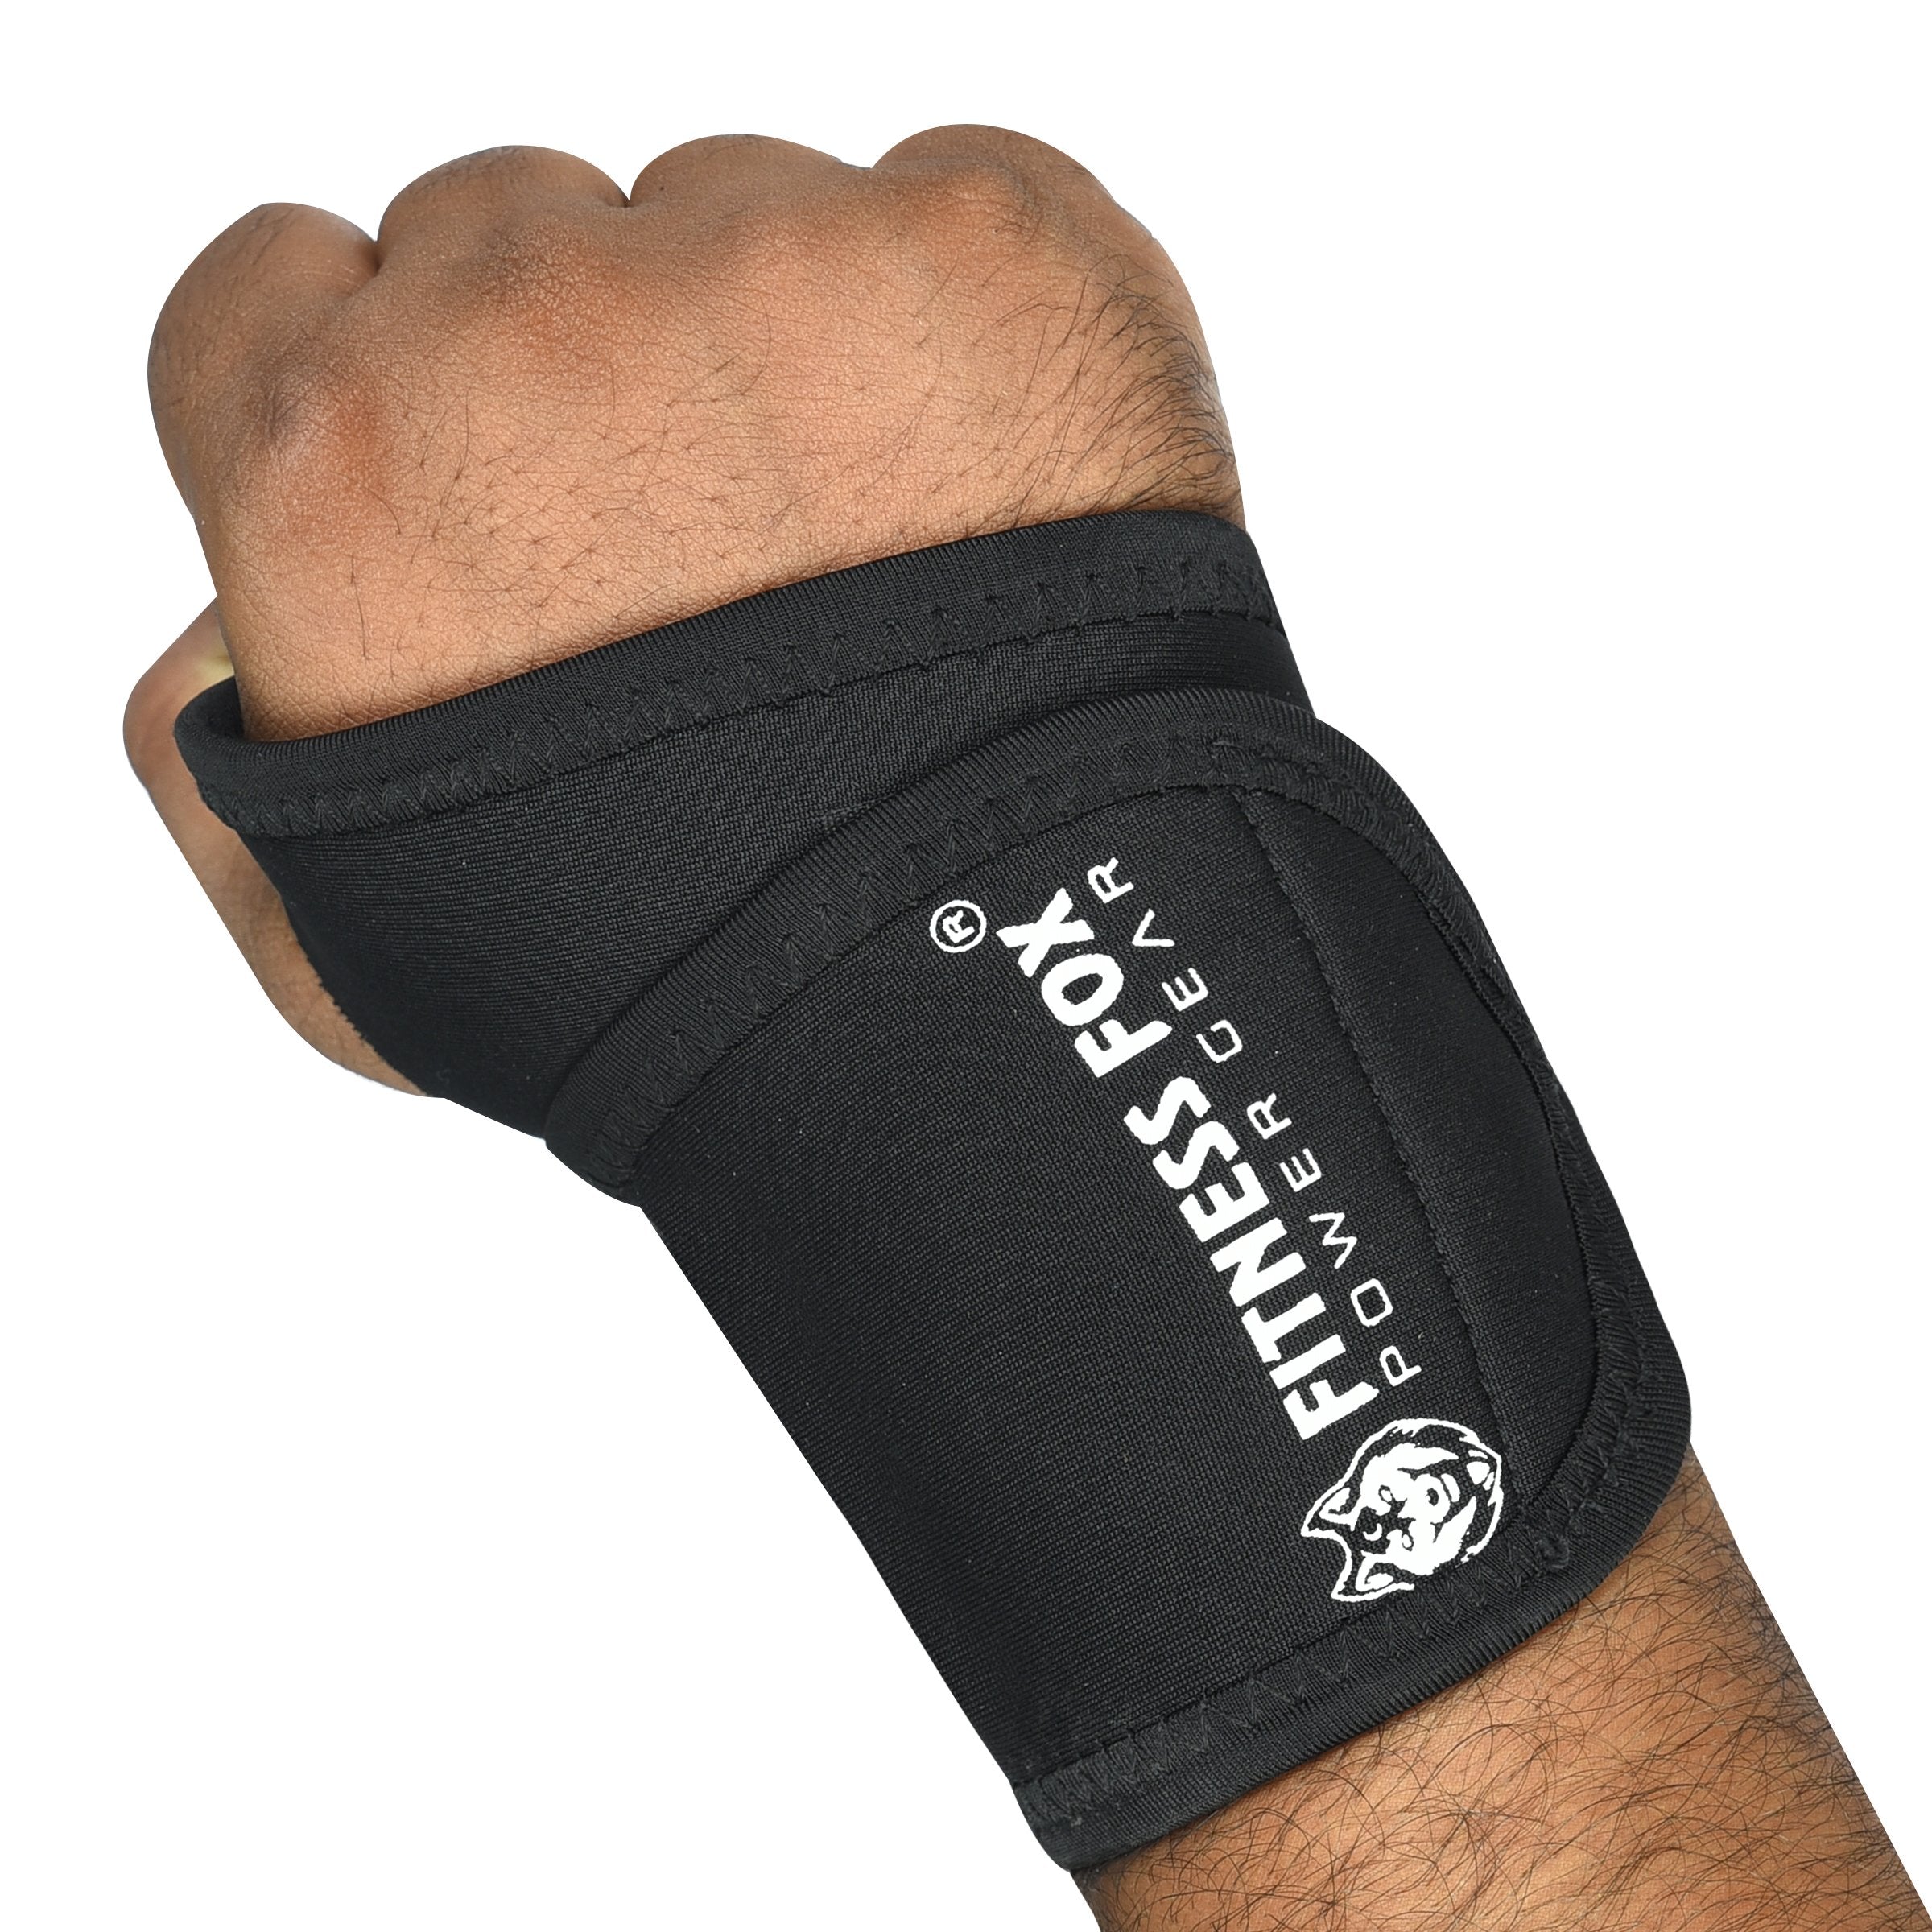 FITNESS FOX Lifting WRIST BRACE Support STRAPS for HAND Support